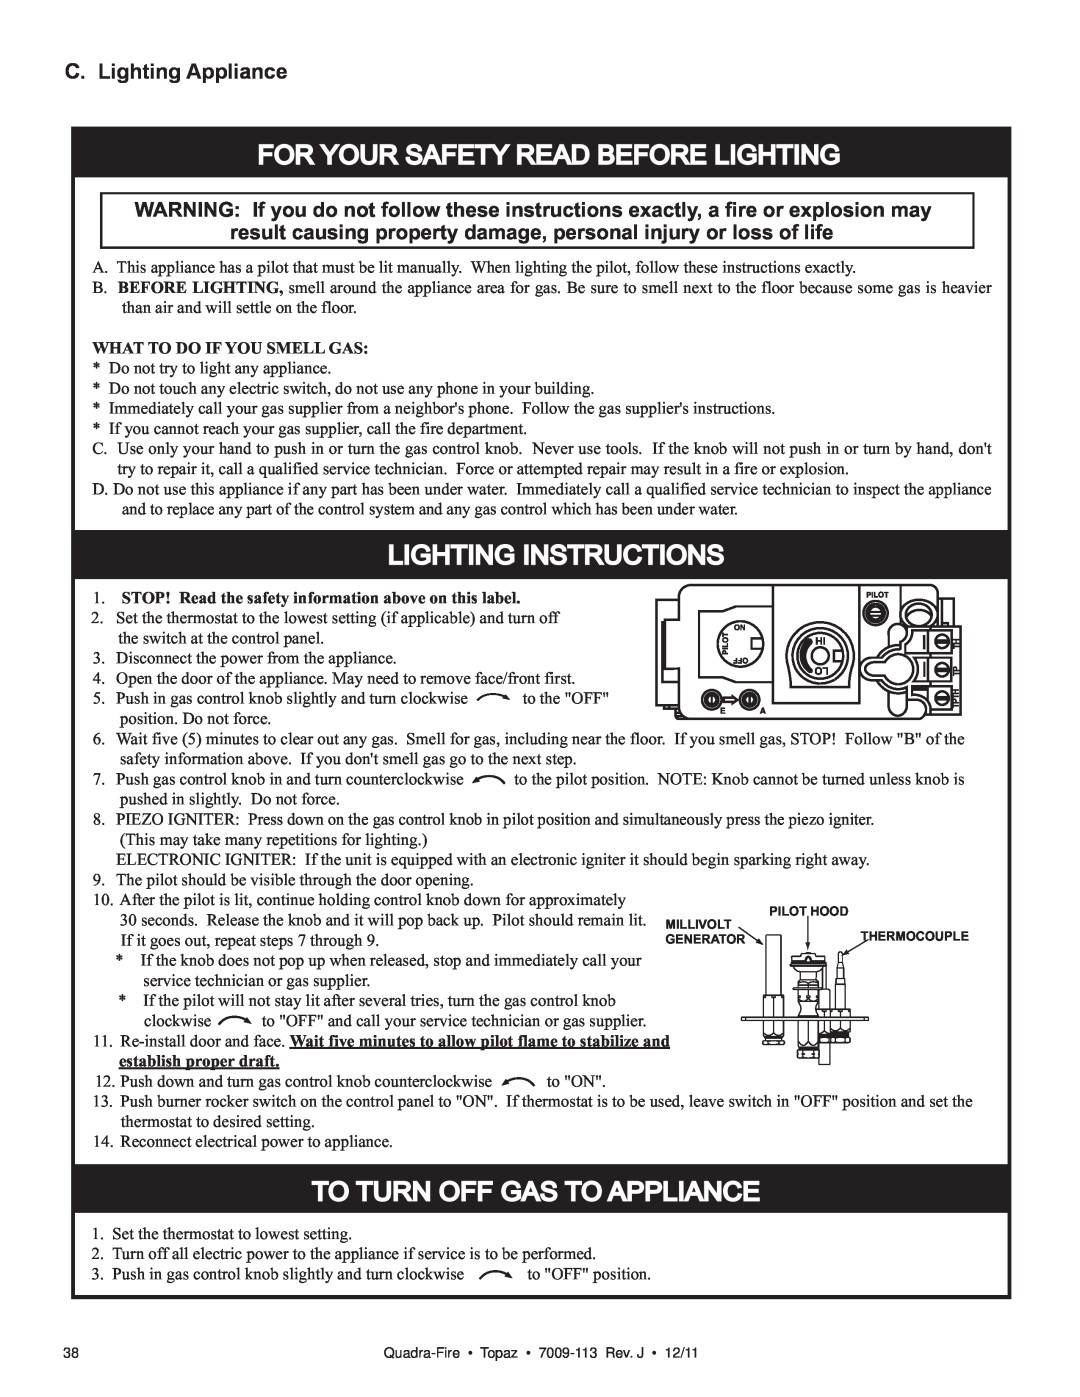 OmniTek 839-1340, 839-1290 For Your Safety Read Before Lighting, Lighting Instructions, To Turn Off Gas To Appliance 